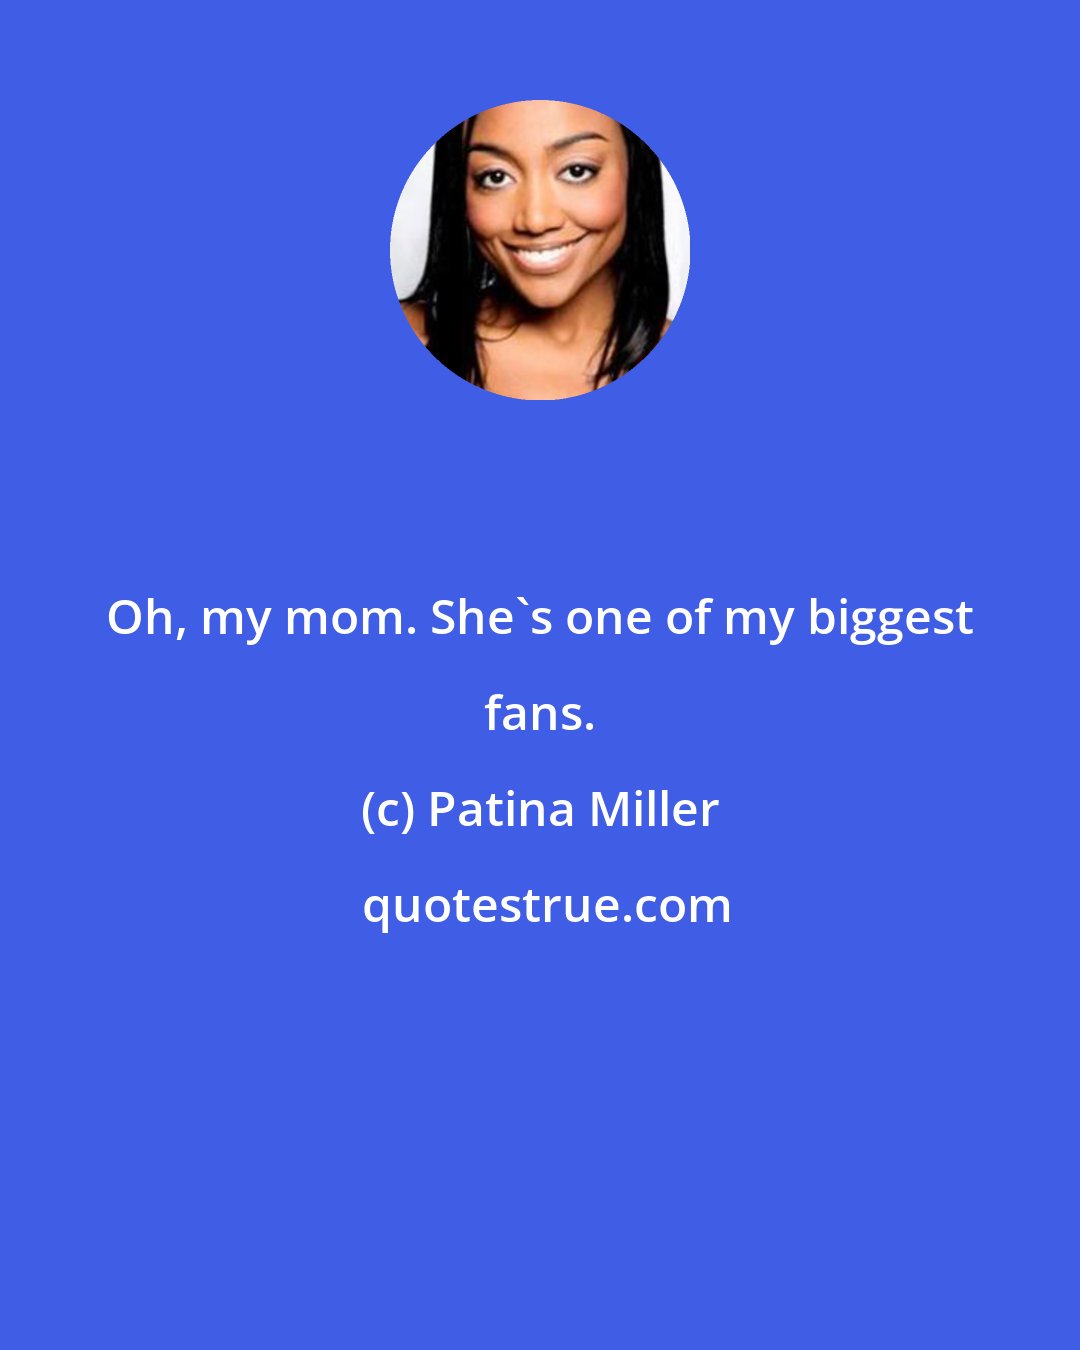 Patina Miller: Oh, my mom. She's one of my biggest fans.